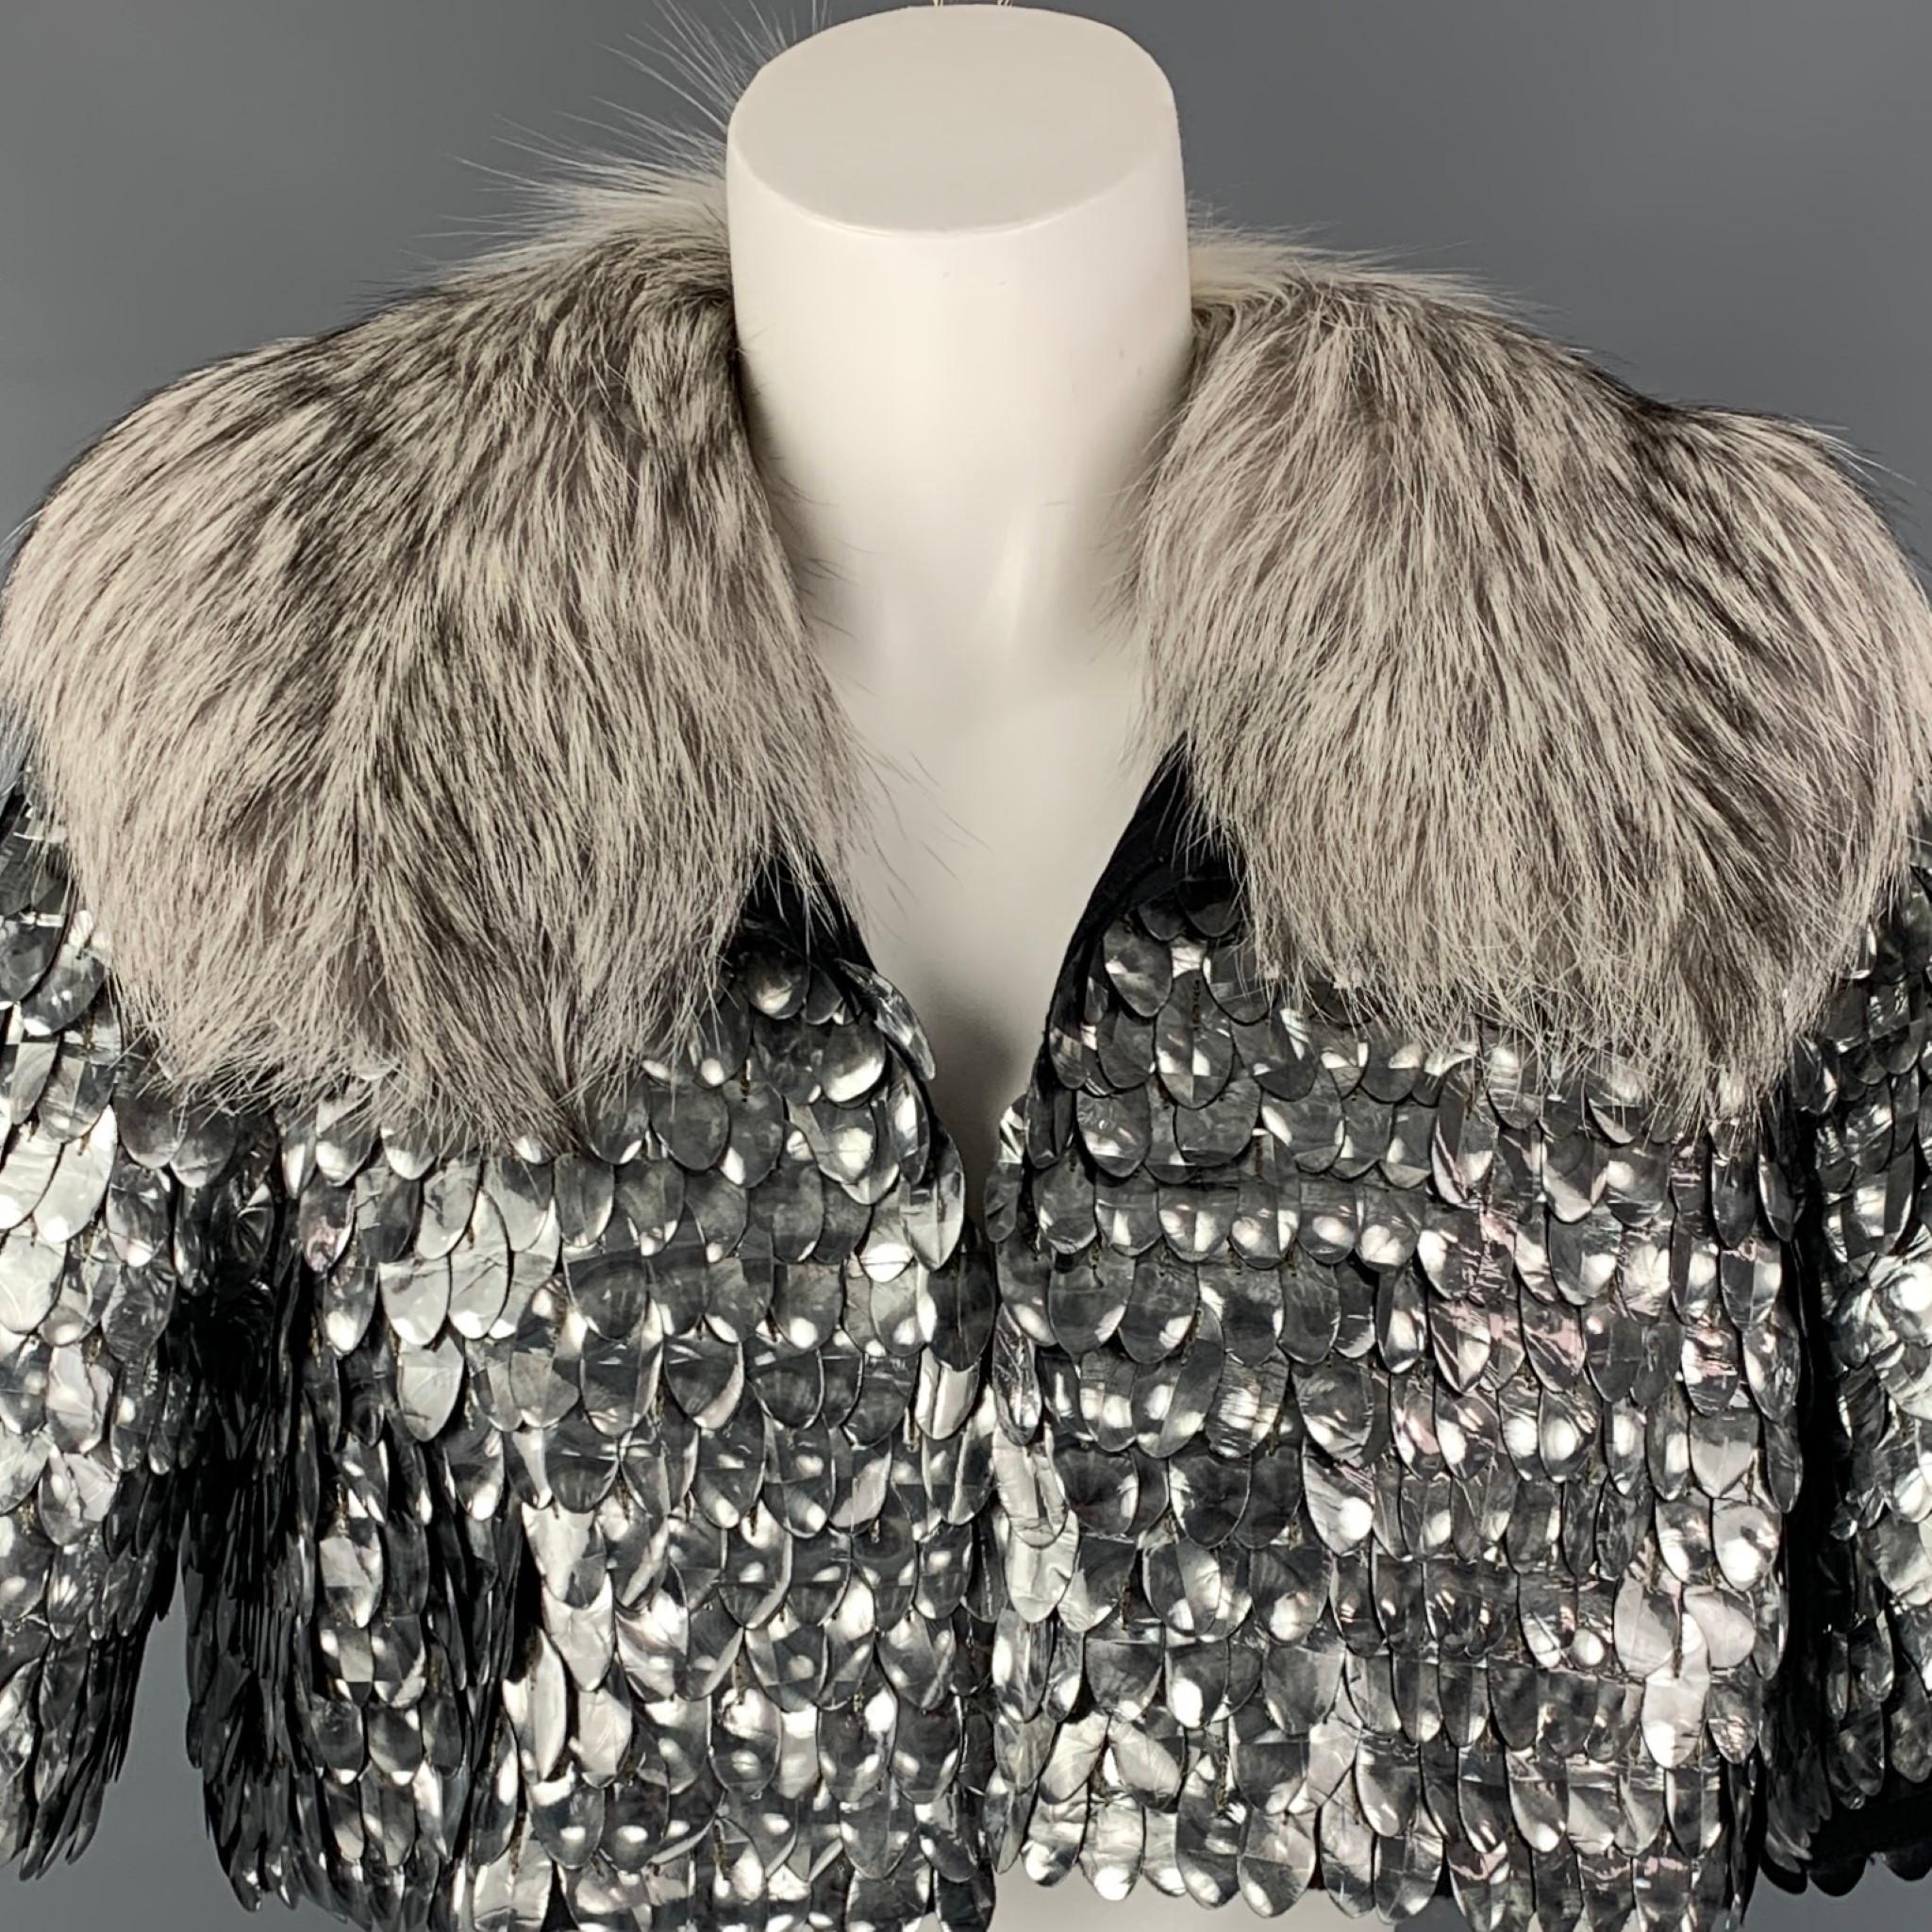 MARC JACOBS jacket comes in a silver & black embellished wool blend with a full liner featuring a cropped style, fox fur collar, and a open front. 

New With Tags. 
Marked: 6

Measurements:

Shoulder: 15 in.
Bust: 38 in.
Sleeve: 11 in.
Length: 14